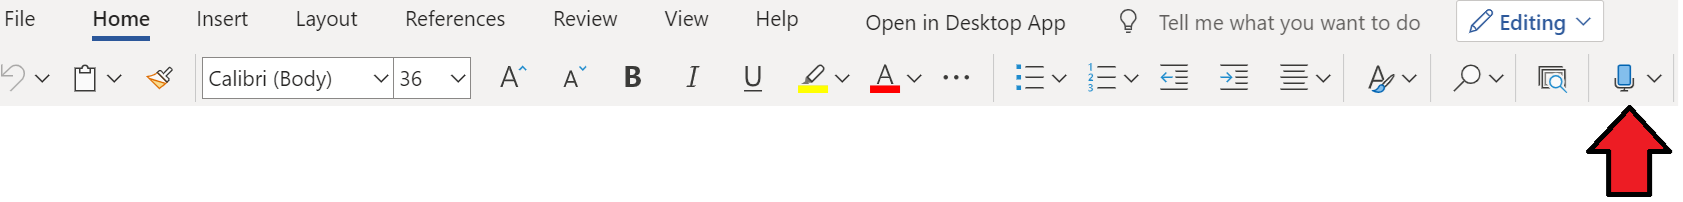 A screen capture of the ribbon in Word, showing where the dictate function is located (if you are using Word for Microsoft 365)